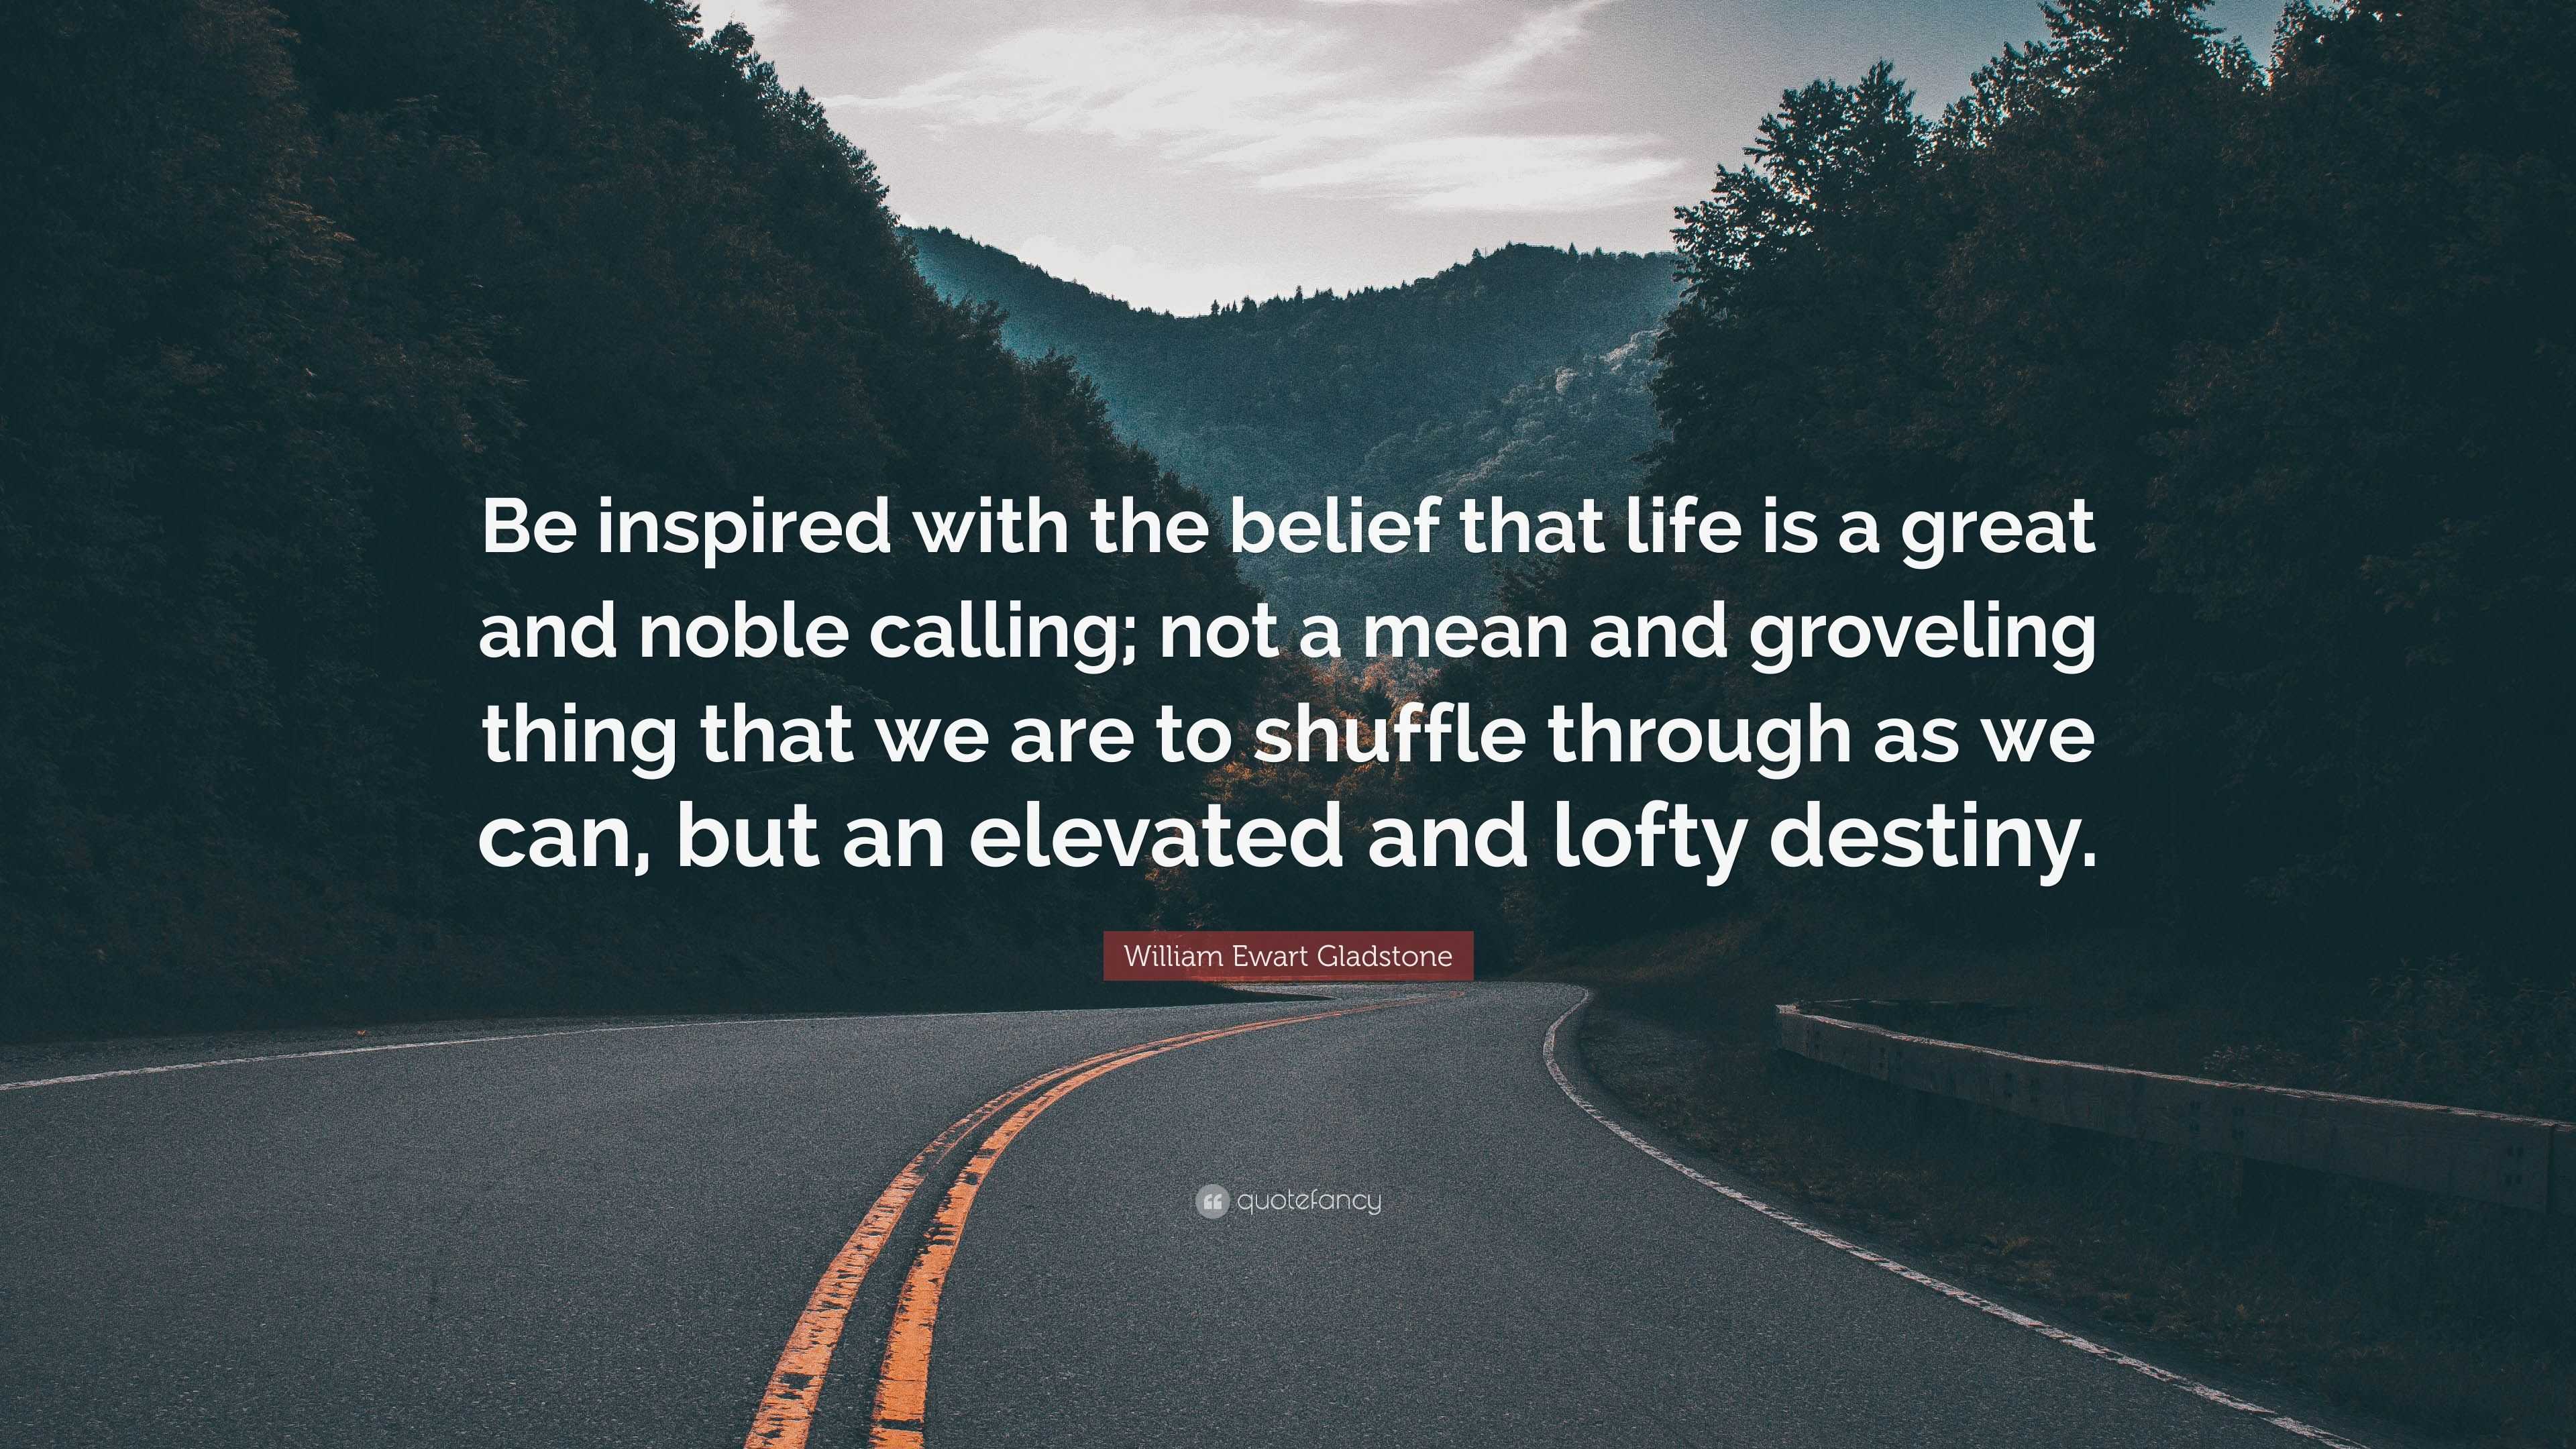 William Ewart Gladstone Quote: “Be inspired with the belief that life ...